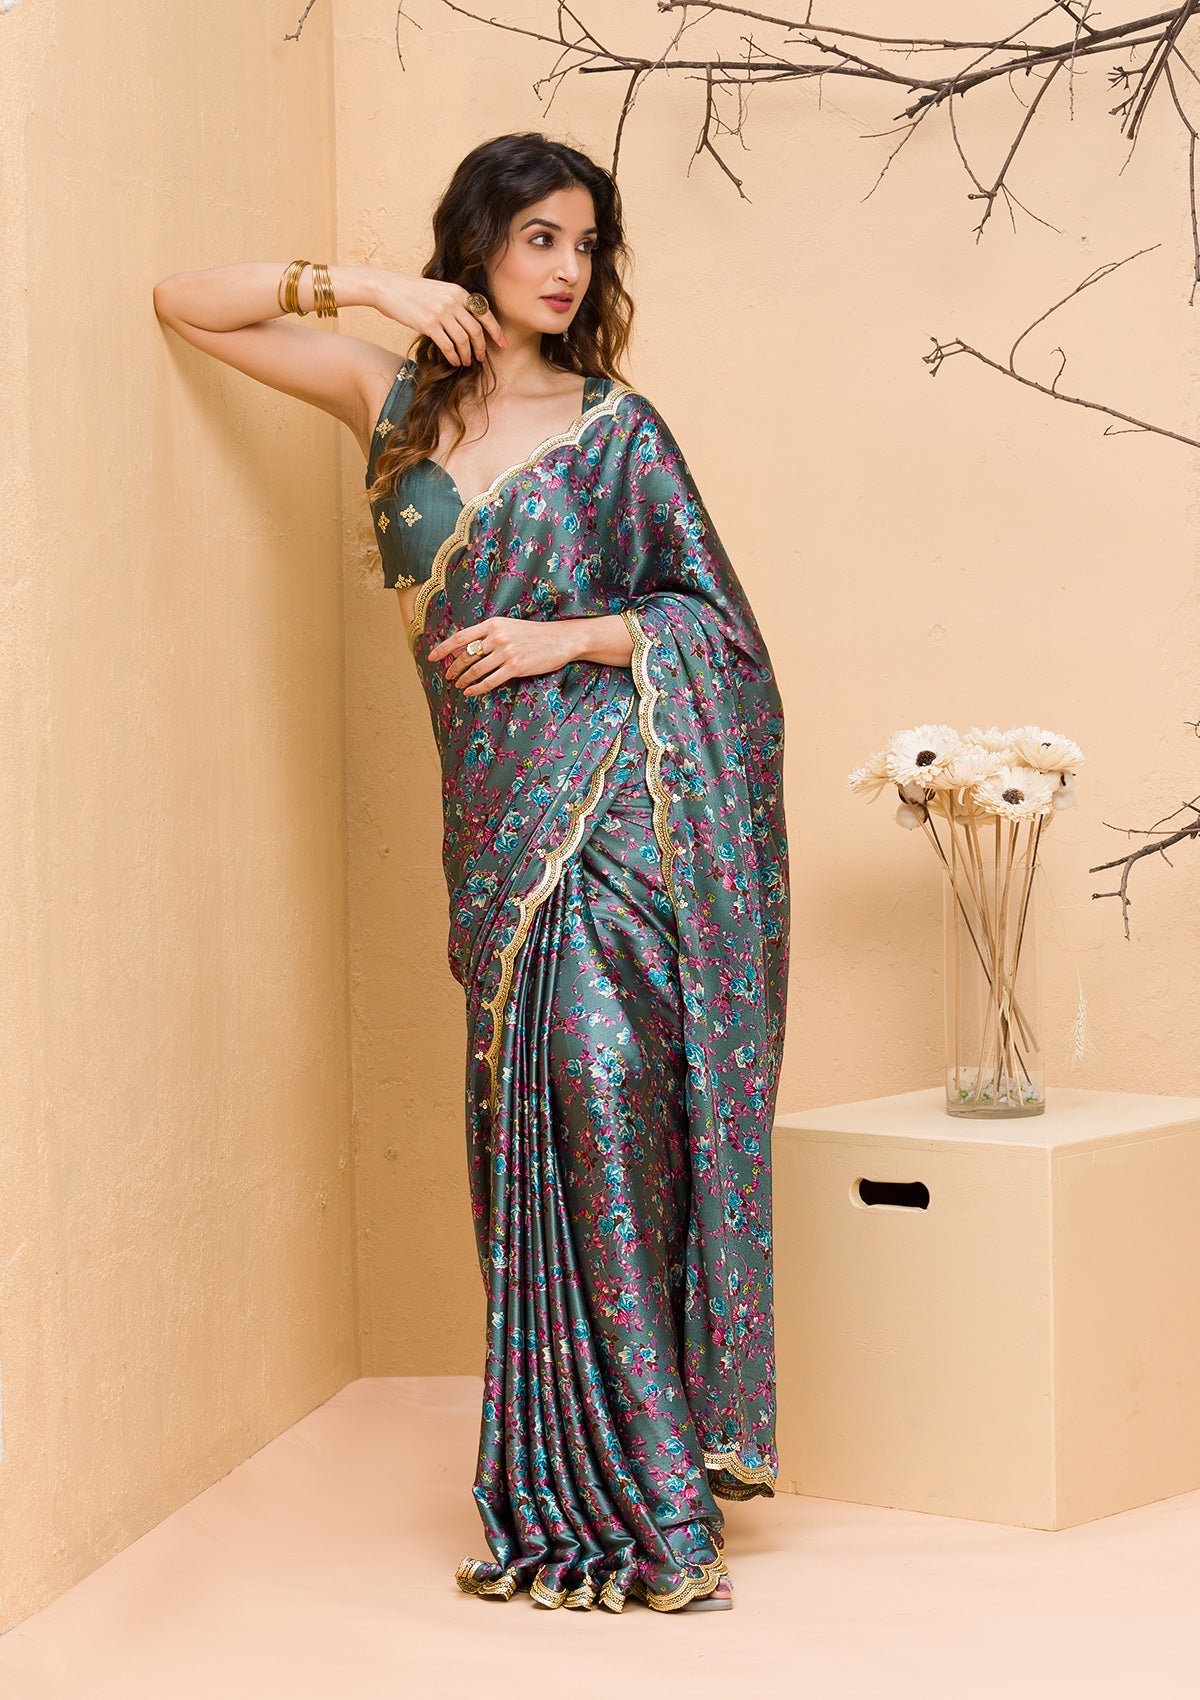 Buy Grey Saree Online For Women At Great Prices – Koskii